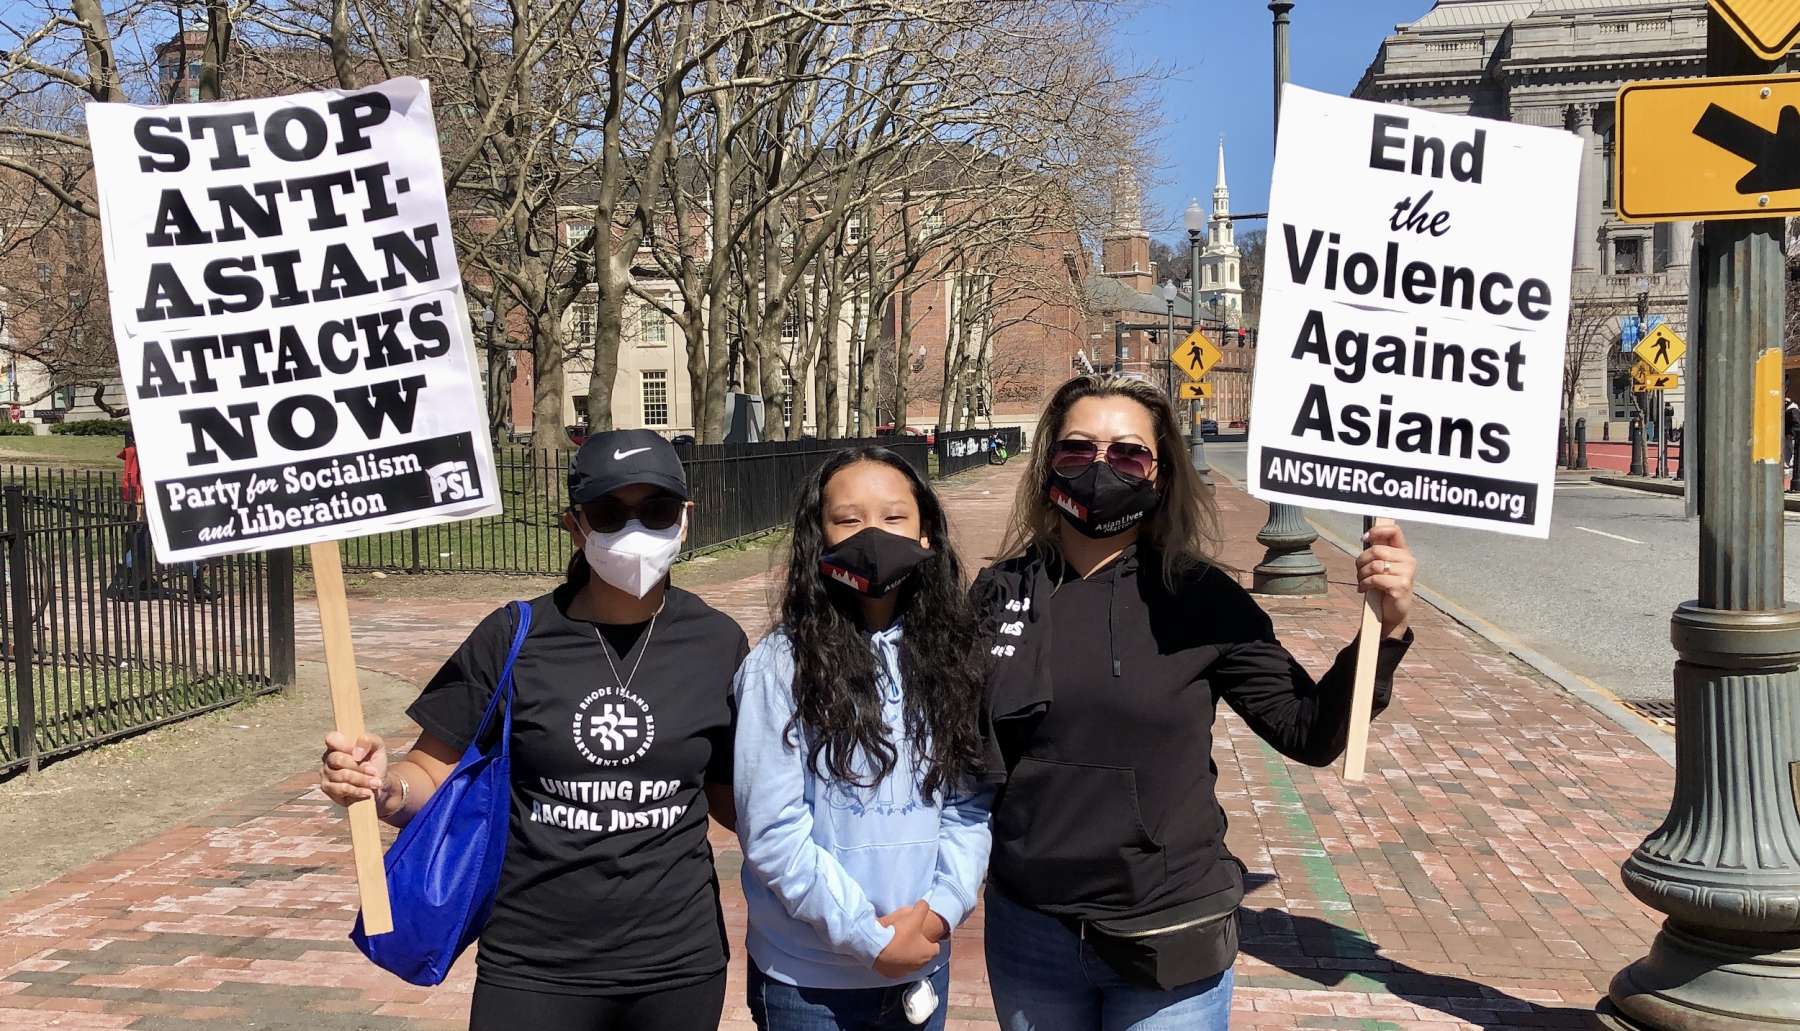 “Call it what it is, a hate crime. Stop anti-Asian violence. Stop China bashing,” say activists in Providence